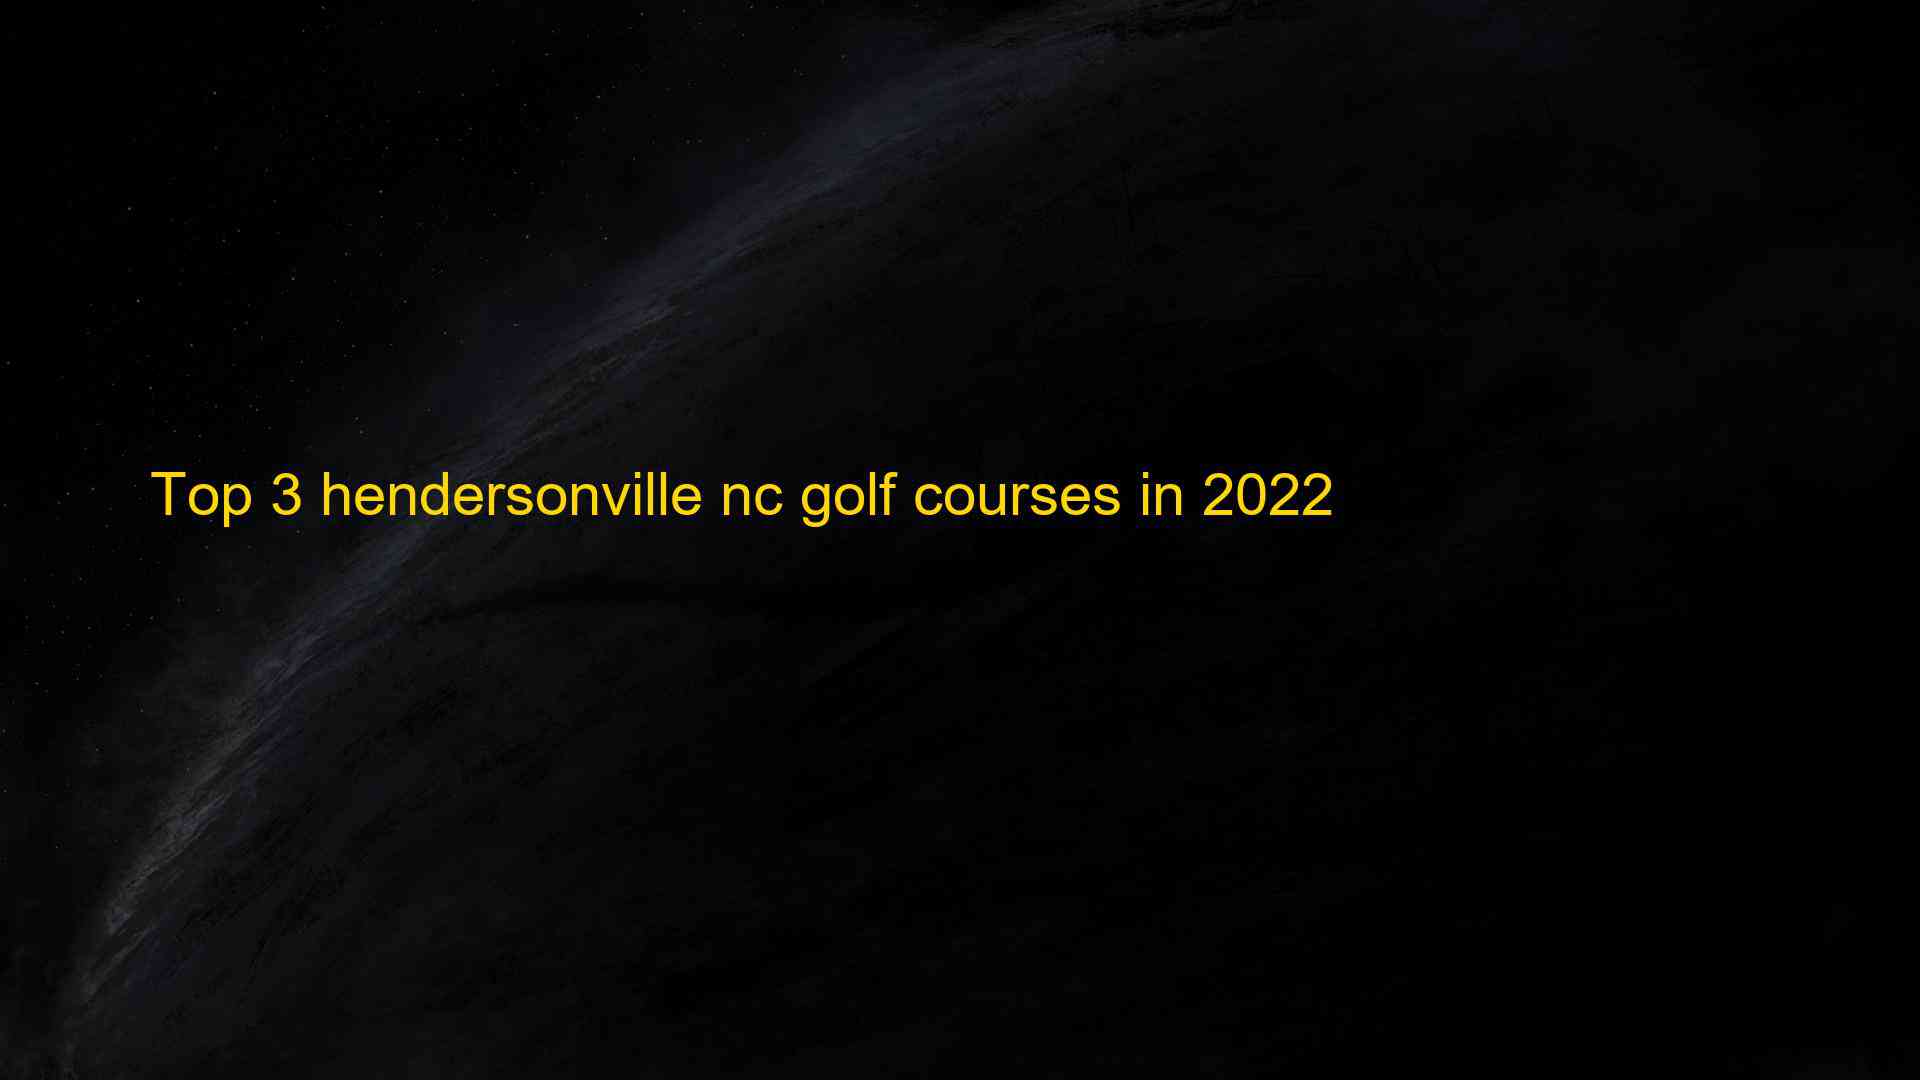 Top 3 hendersonville nc golf courses in 2022 1661924714